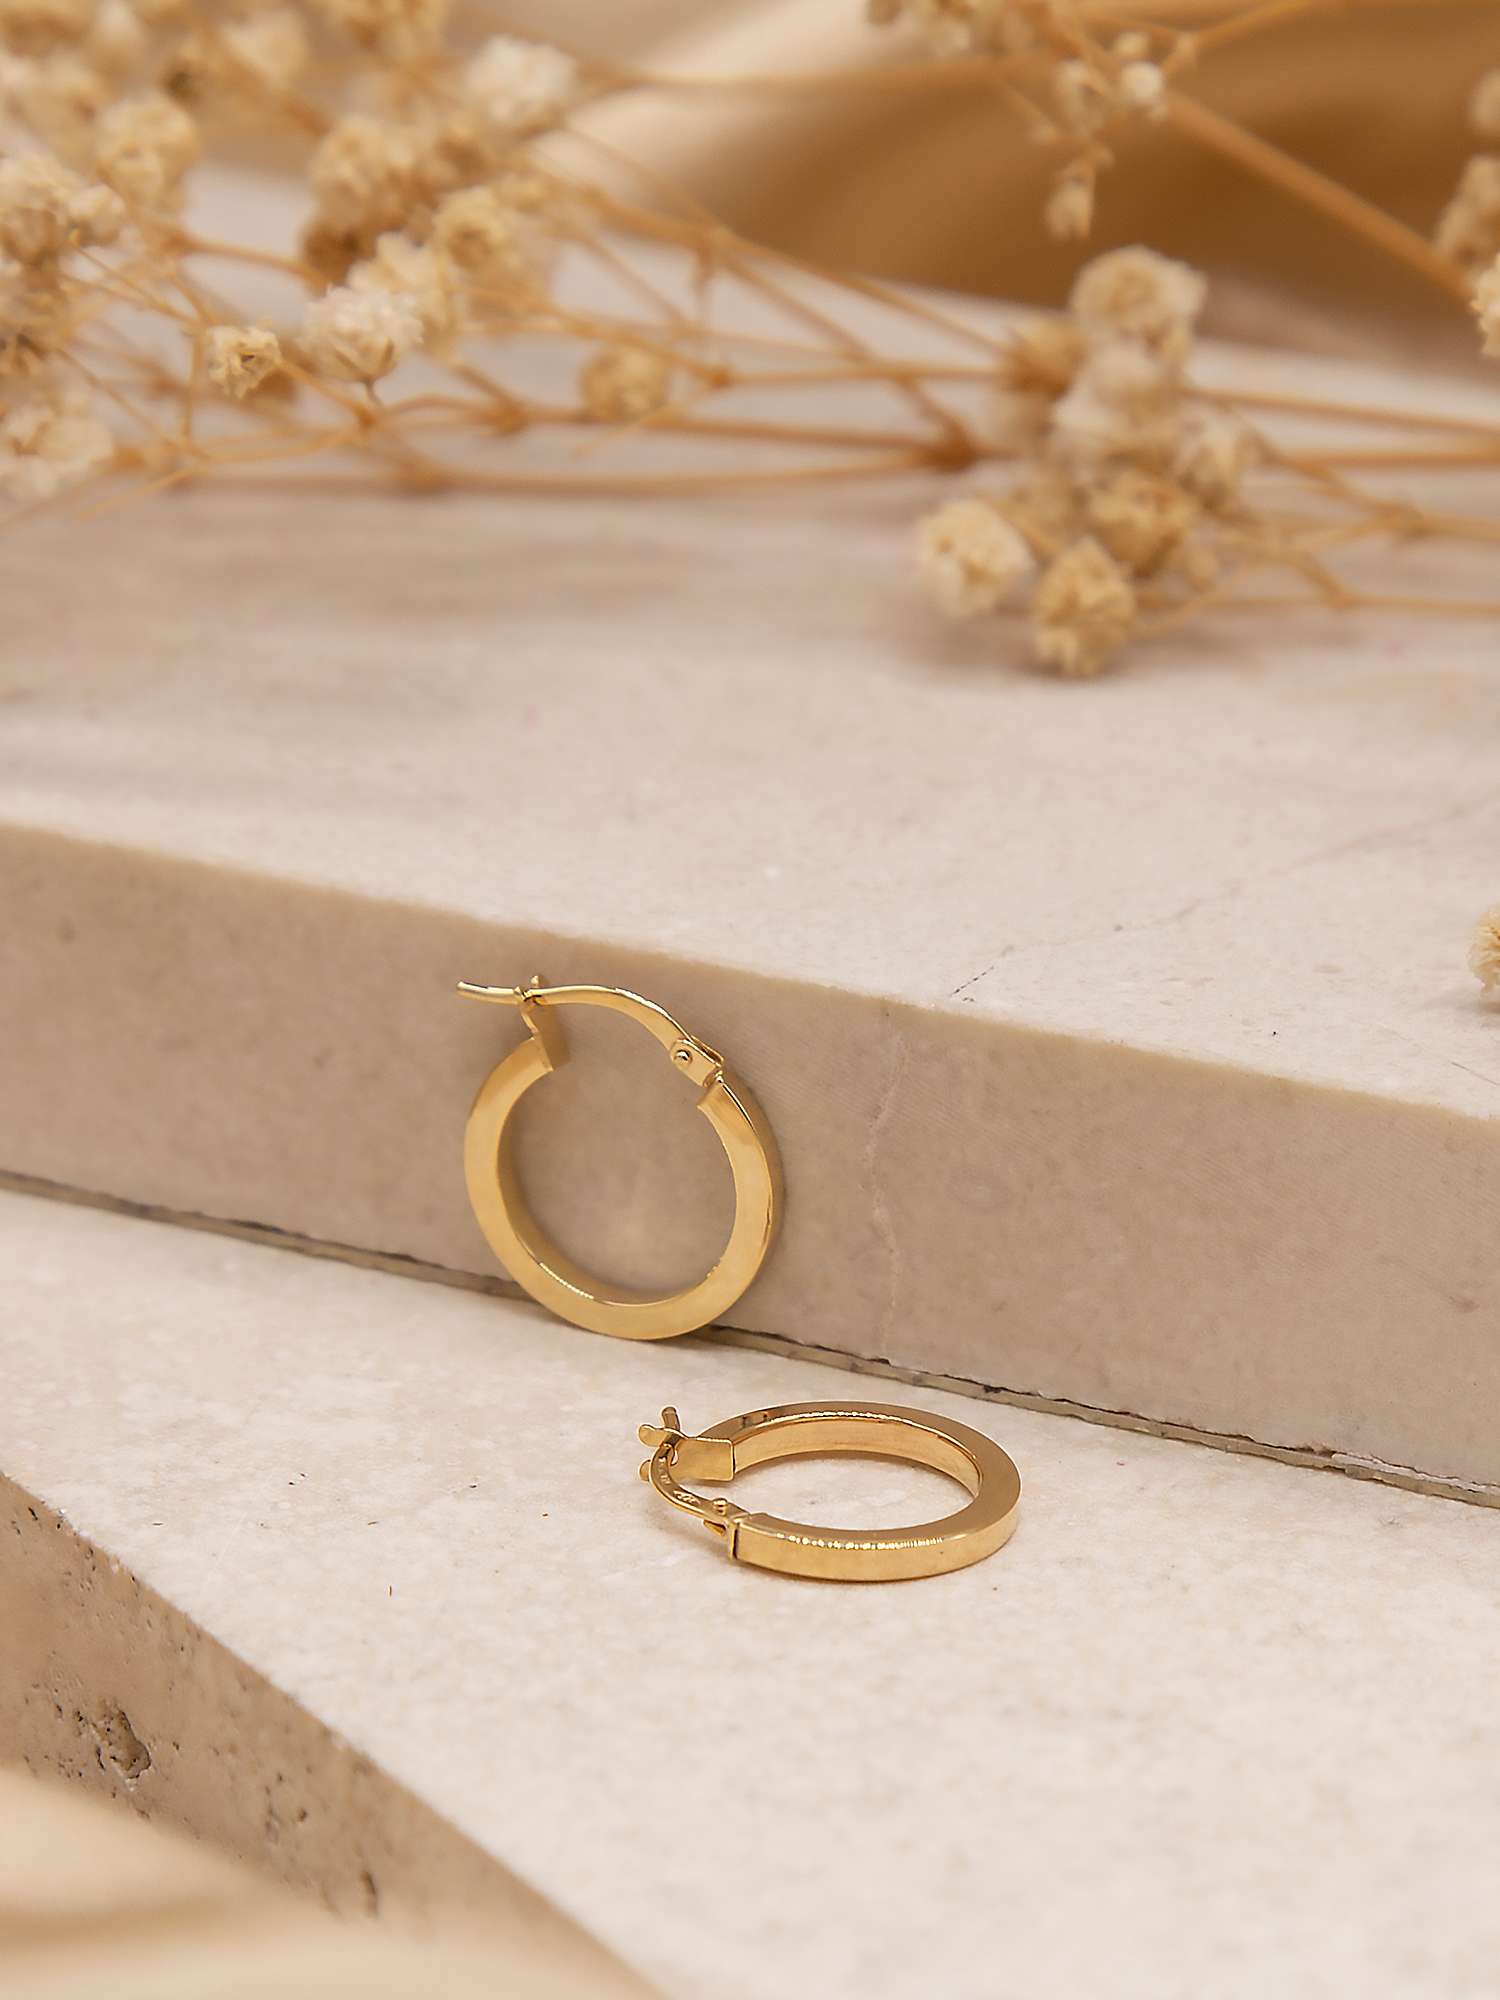 Buy IBB 9ct Yellow Gold Creole Leverback Hoop Earrings, Gold Online at johnlewis.com